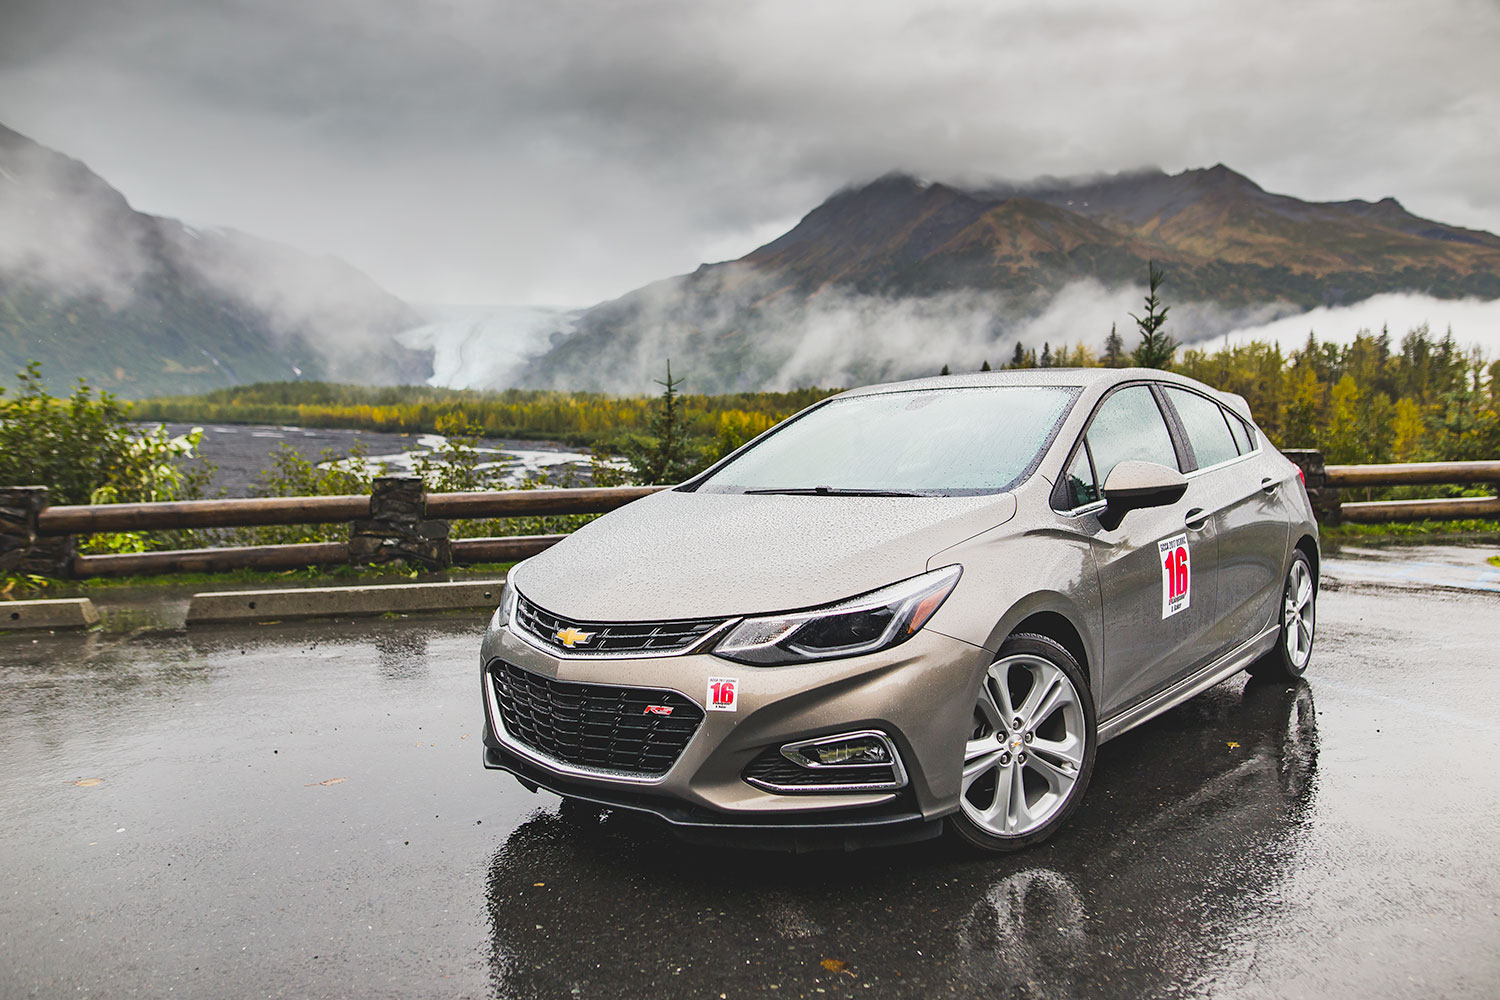 2018 Chevrolet Cruze Hatch Diesel First Drive Review